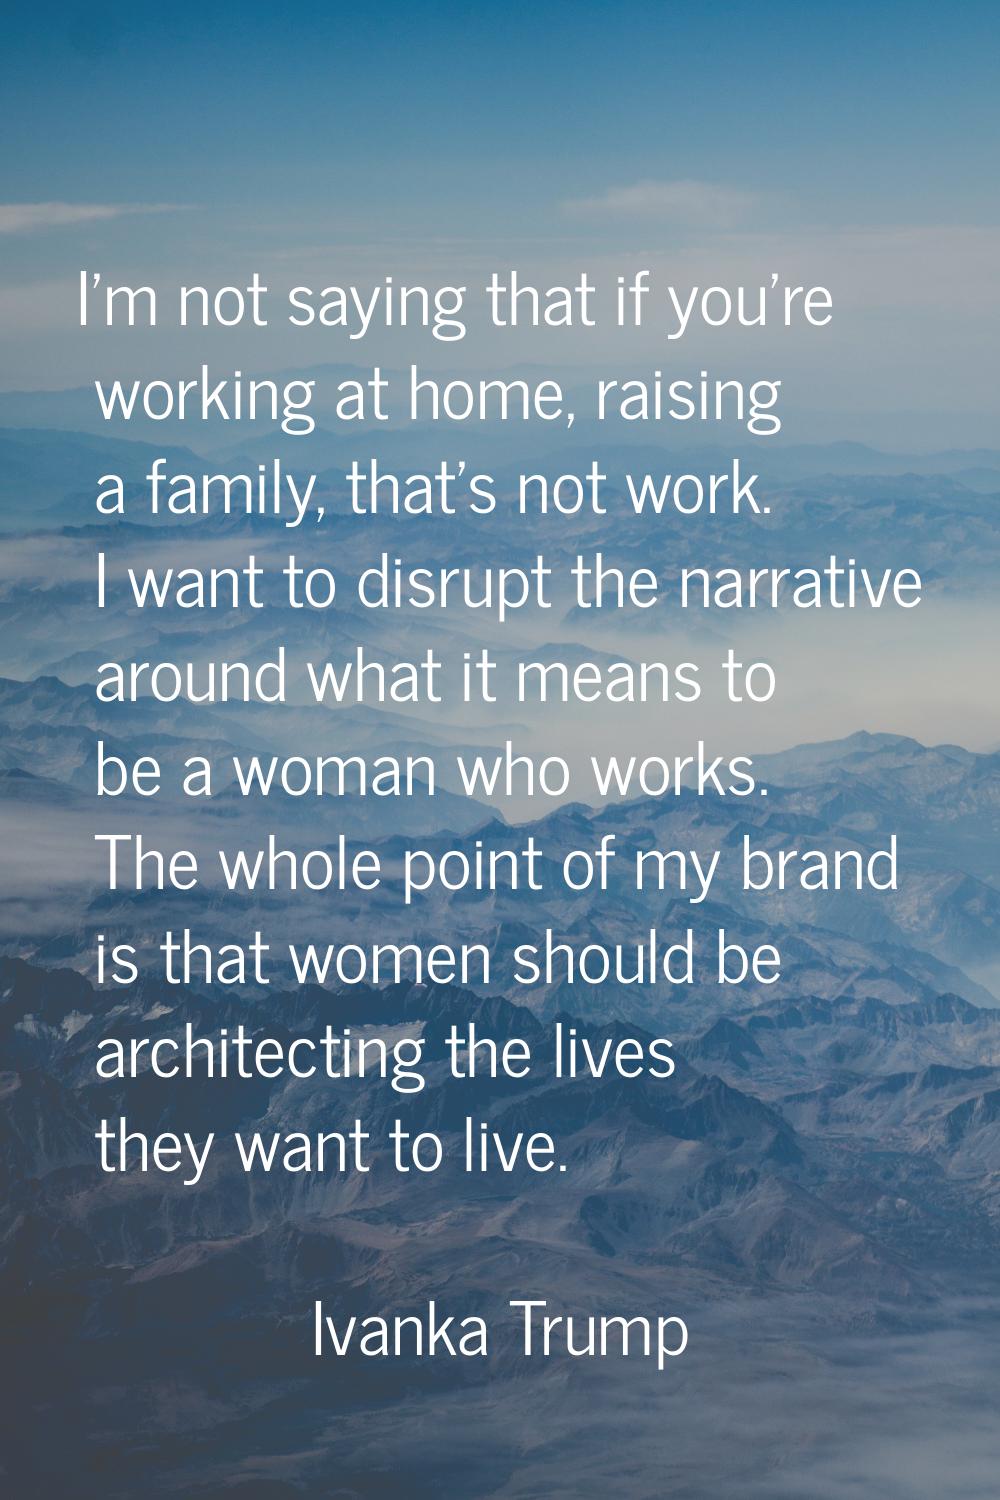 I'm not saying that if you're working at home, raising a family, that's not work. I want to disrupt